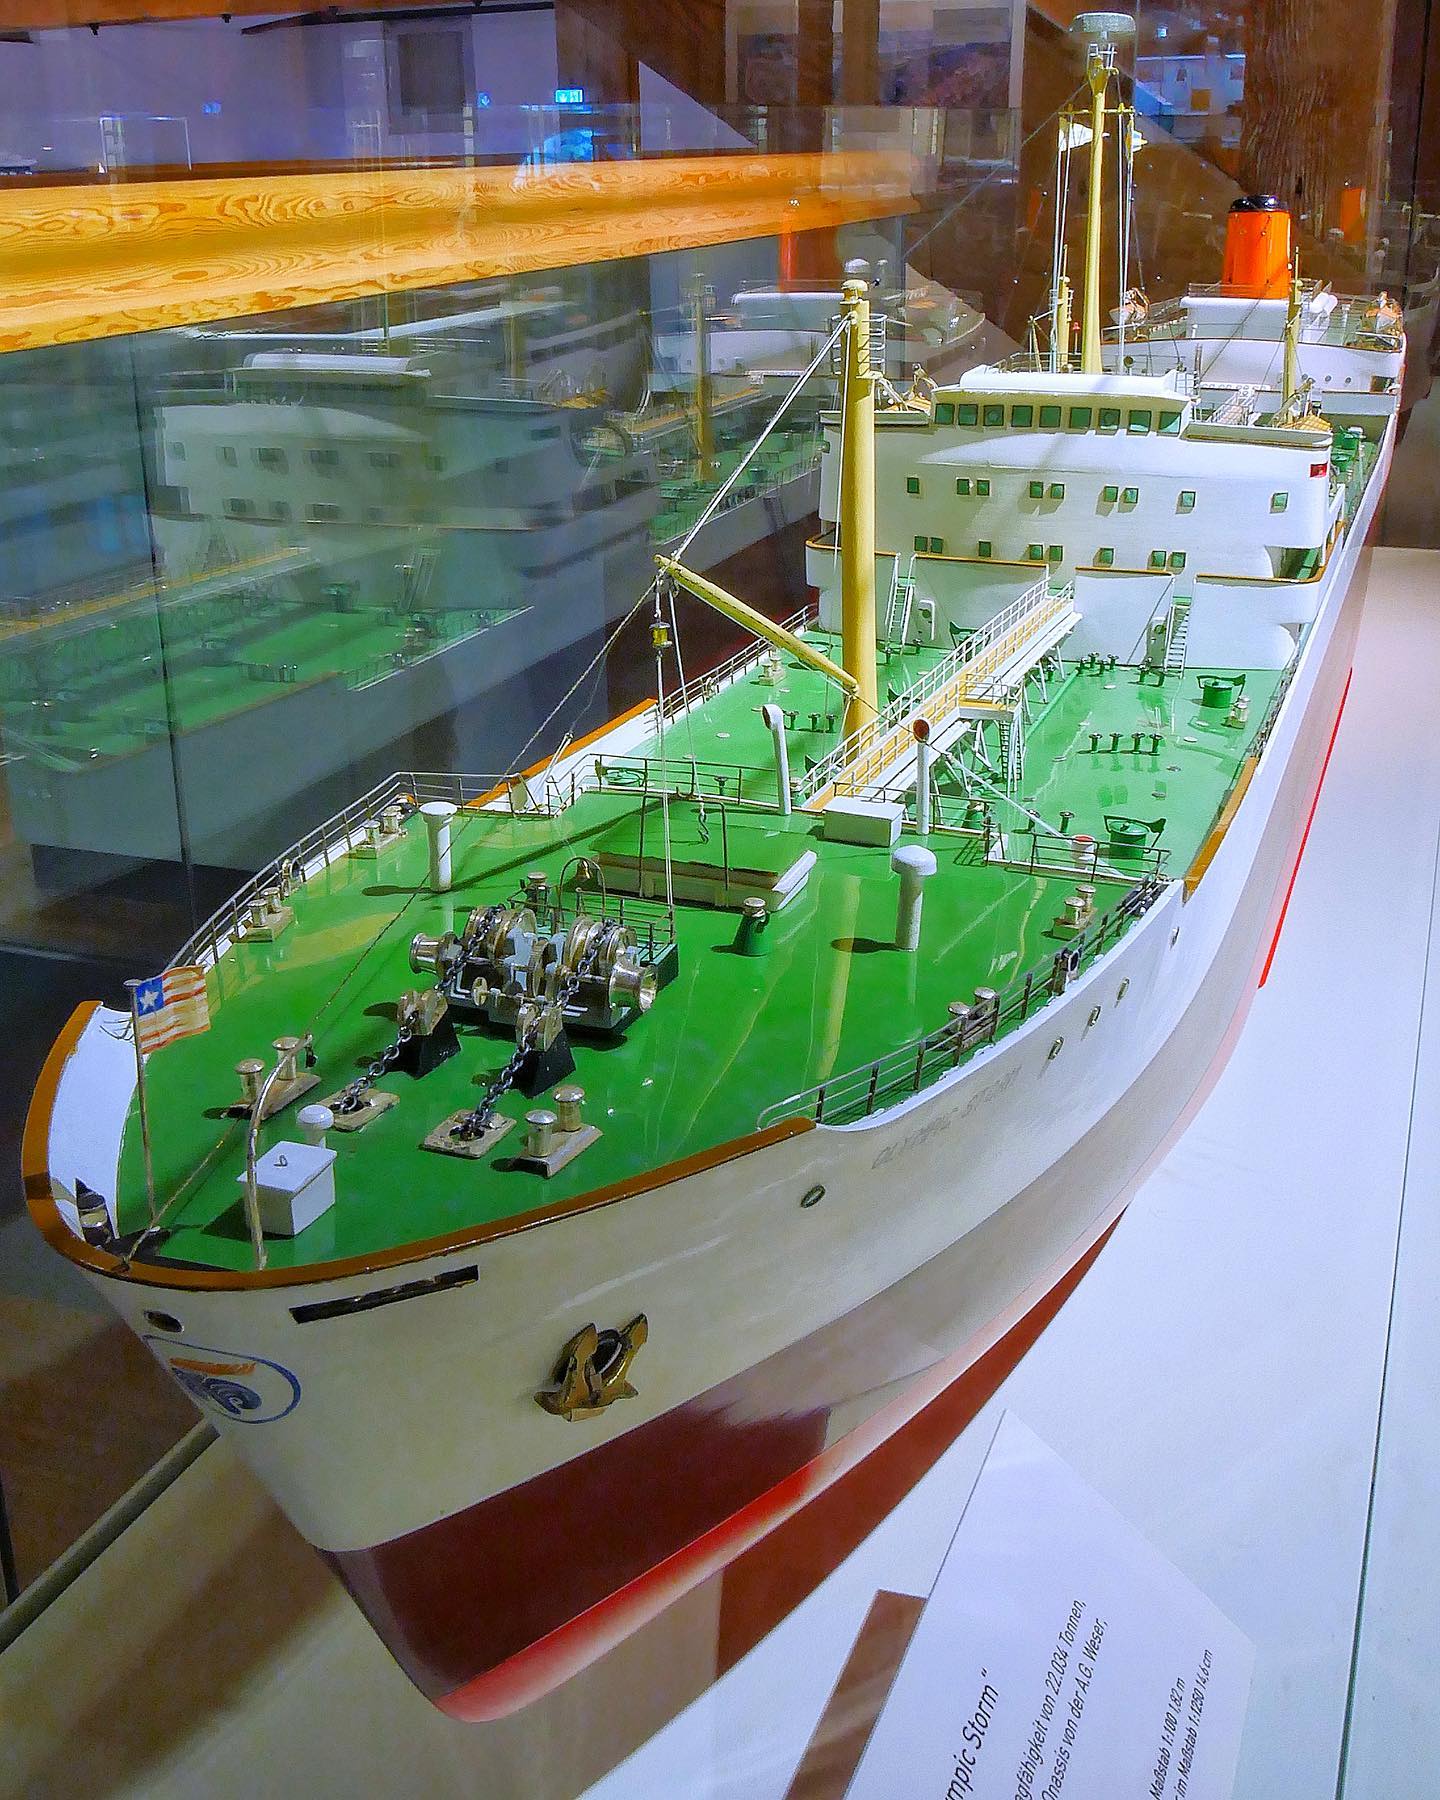 Tanker Olympic Storm. The magnificent shipyard model shown here was built by the Unterweser Modellbau workshop on a scale of 1:100. It is on display in our exhibition on deck 9 of the museum.